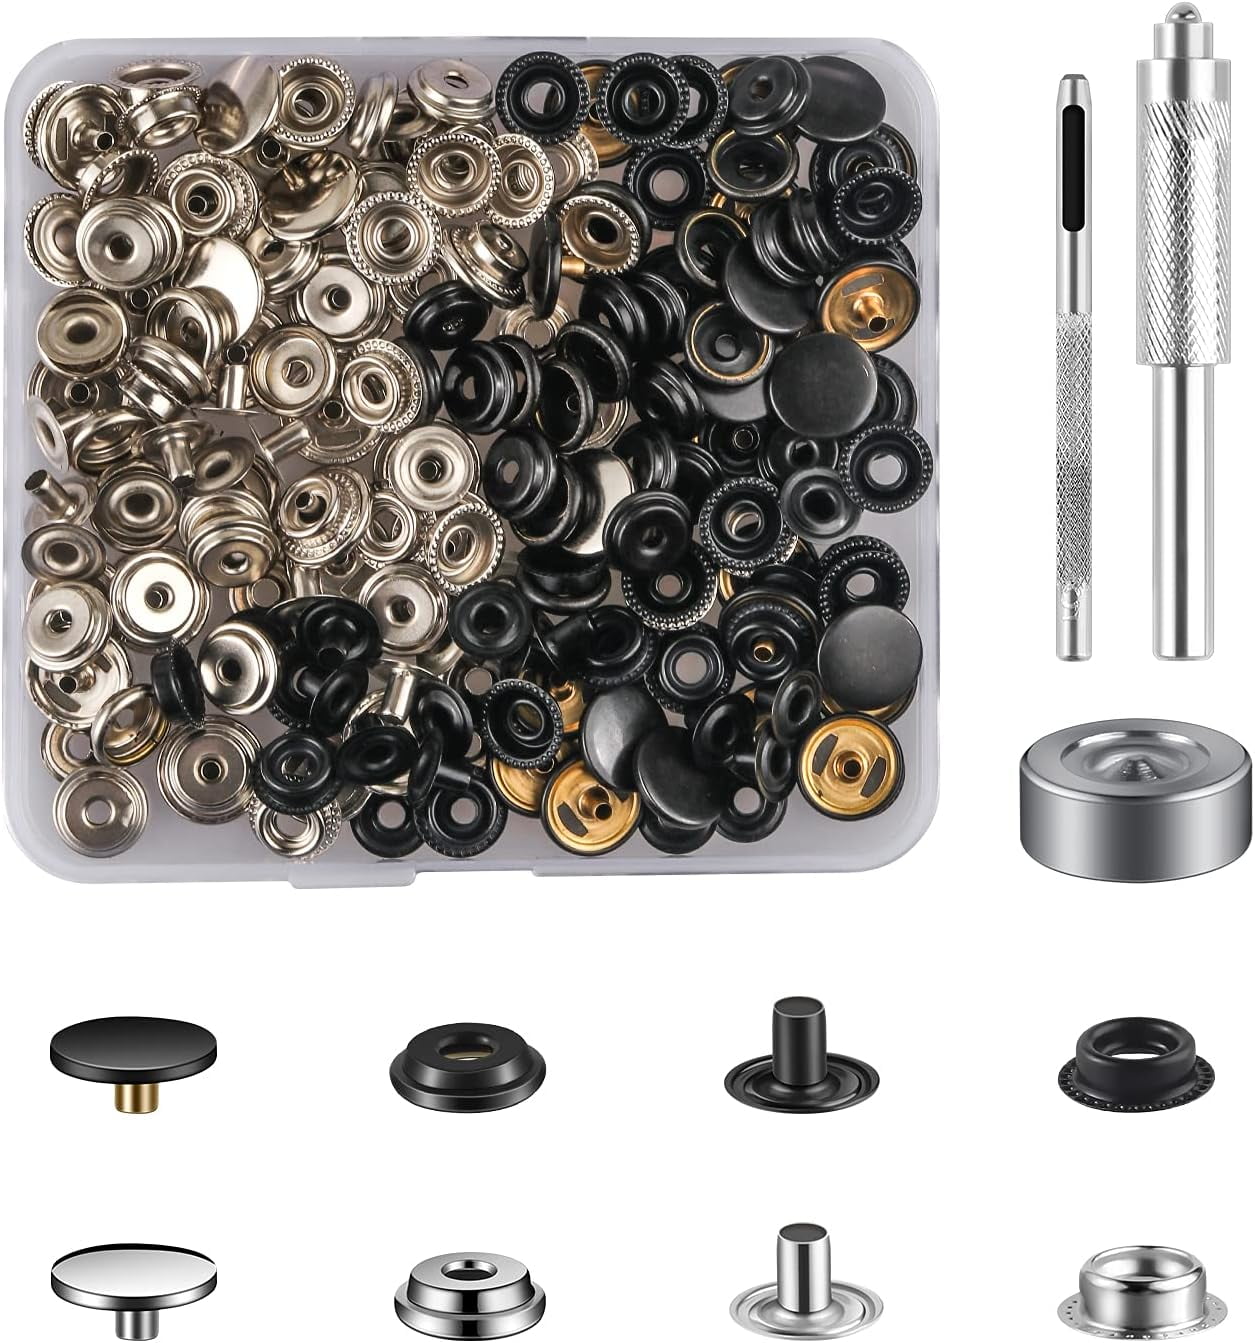  200 Pieces (50 Sets) 15MM Leather Snap and Fastener Kit 5/8  inches (15mm) Snap Button for Leather Snaps and Fasteners for Leather  Stainless Snaps for Bag, Jeans, Clothes, Fabric (Black+Bronze) 